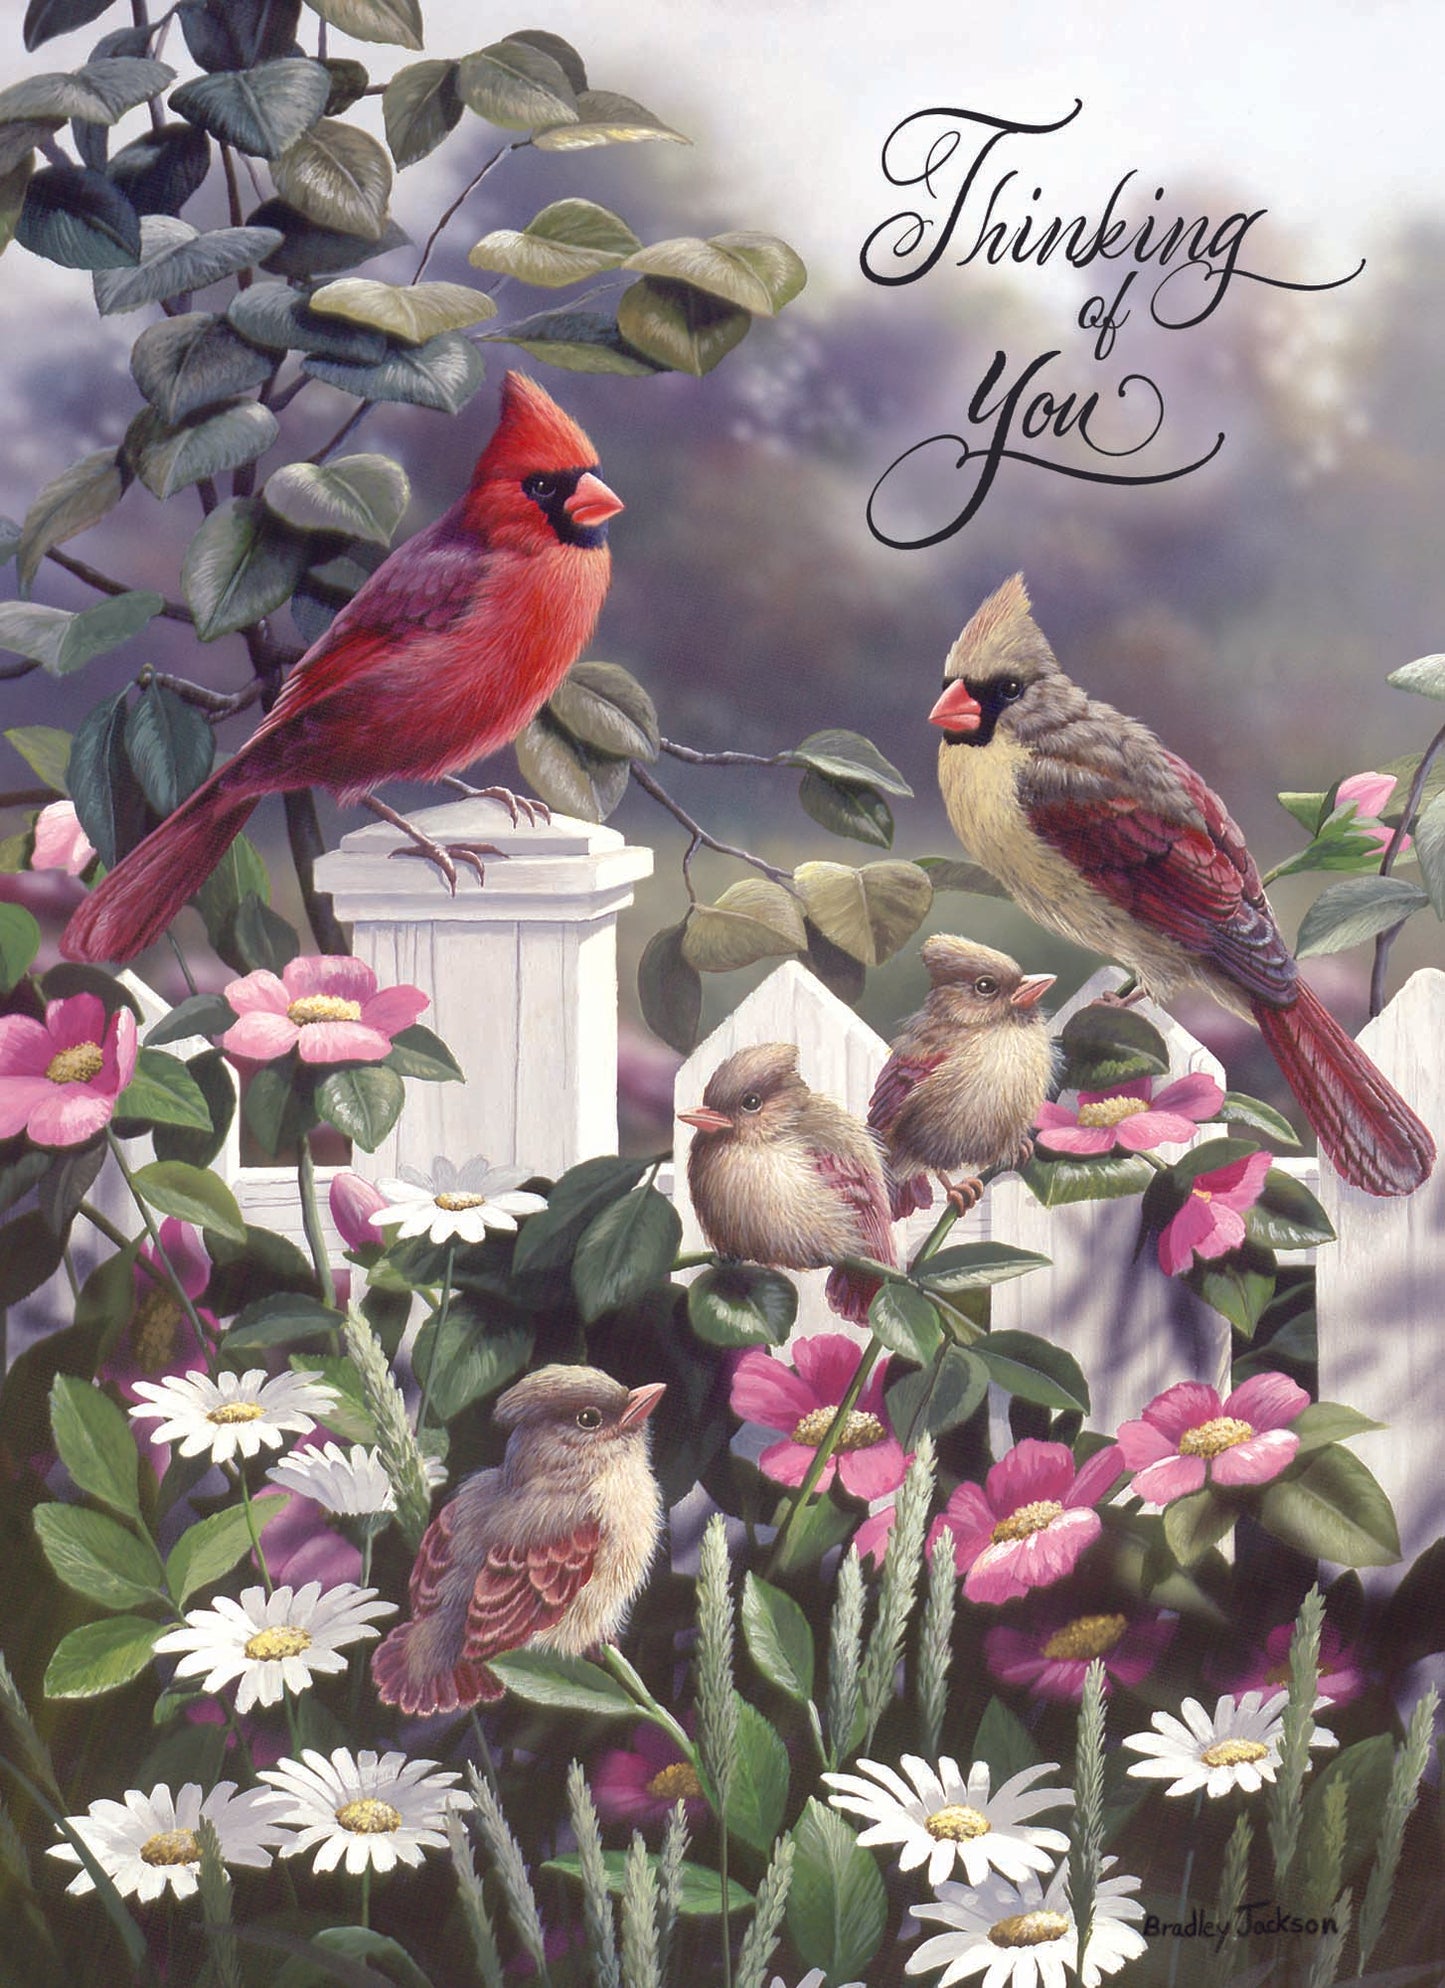 Signs of Spring  - Boxed Thinking of You Cards, Box of 12